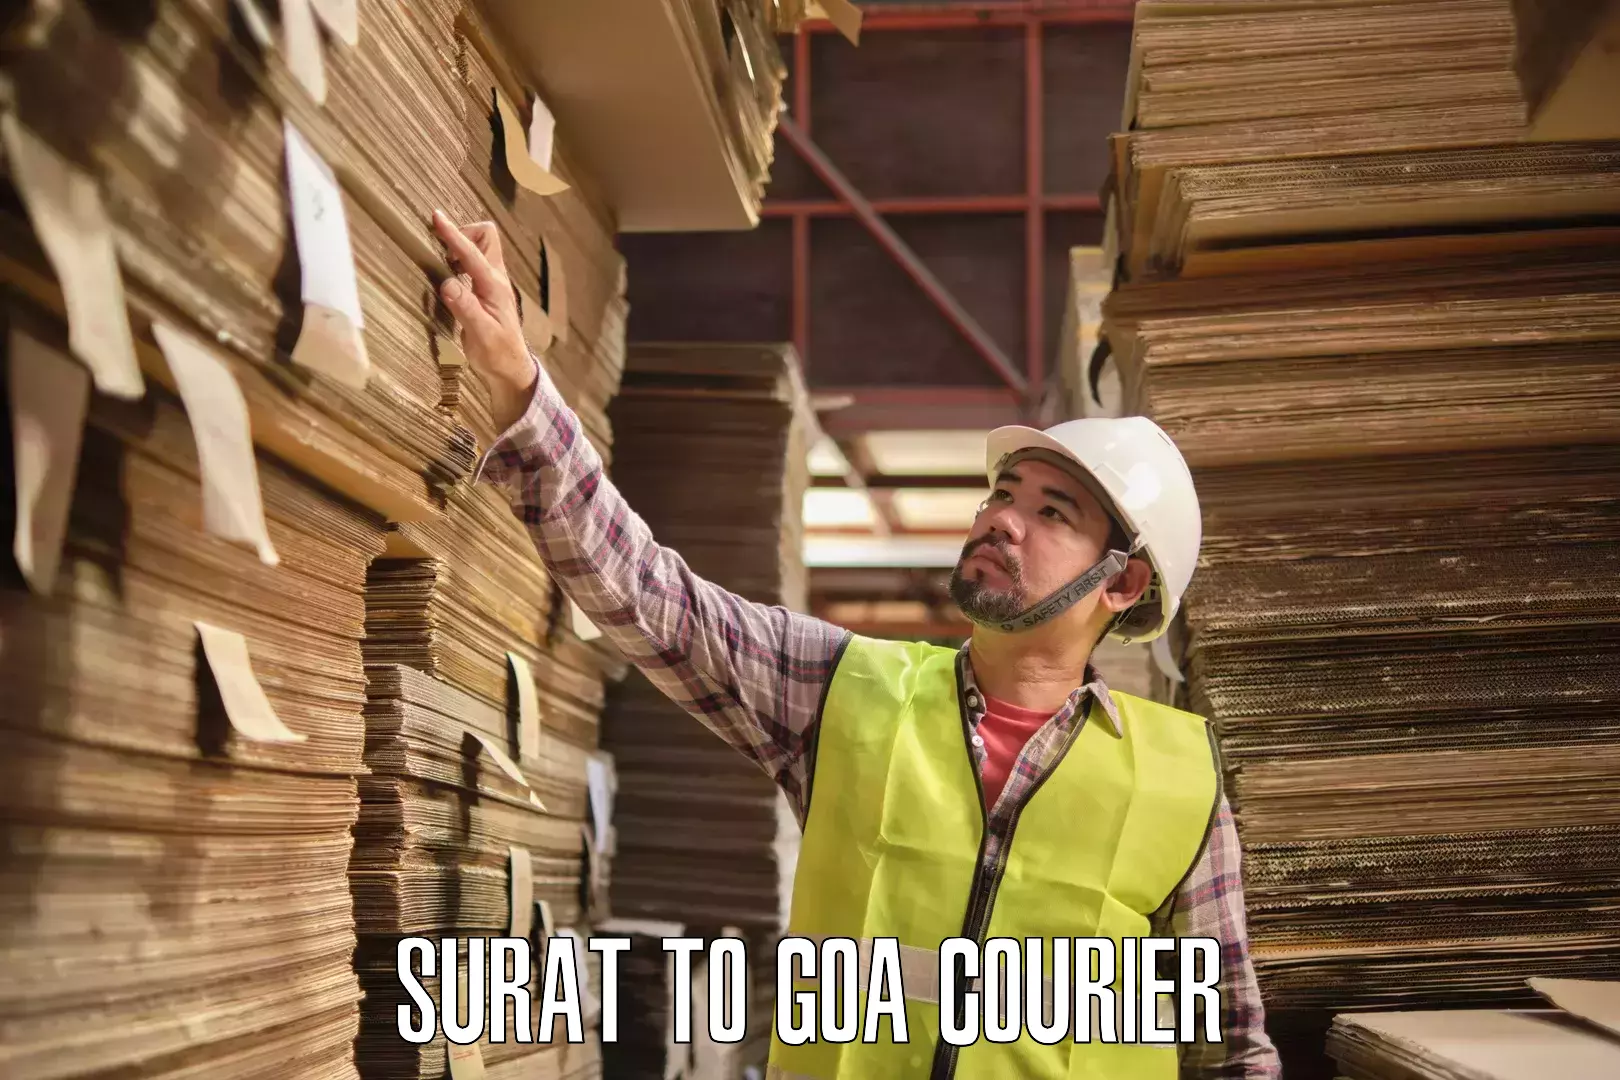 Business delivery service Surat to Goa